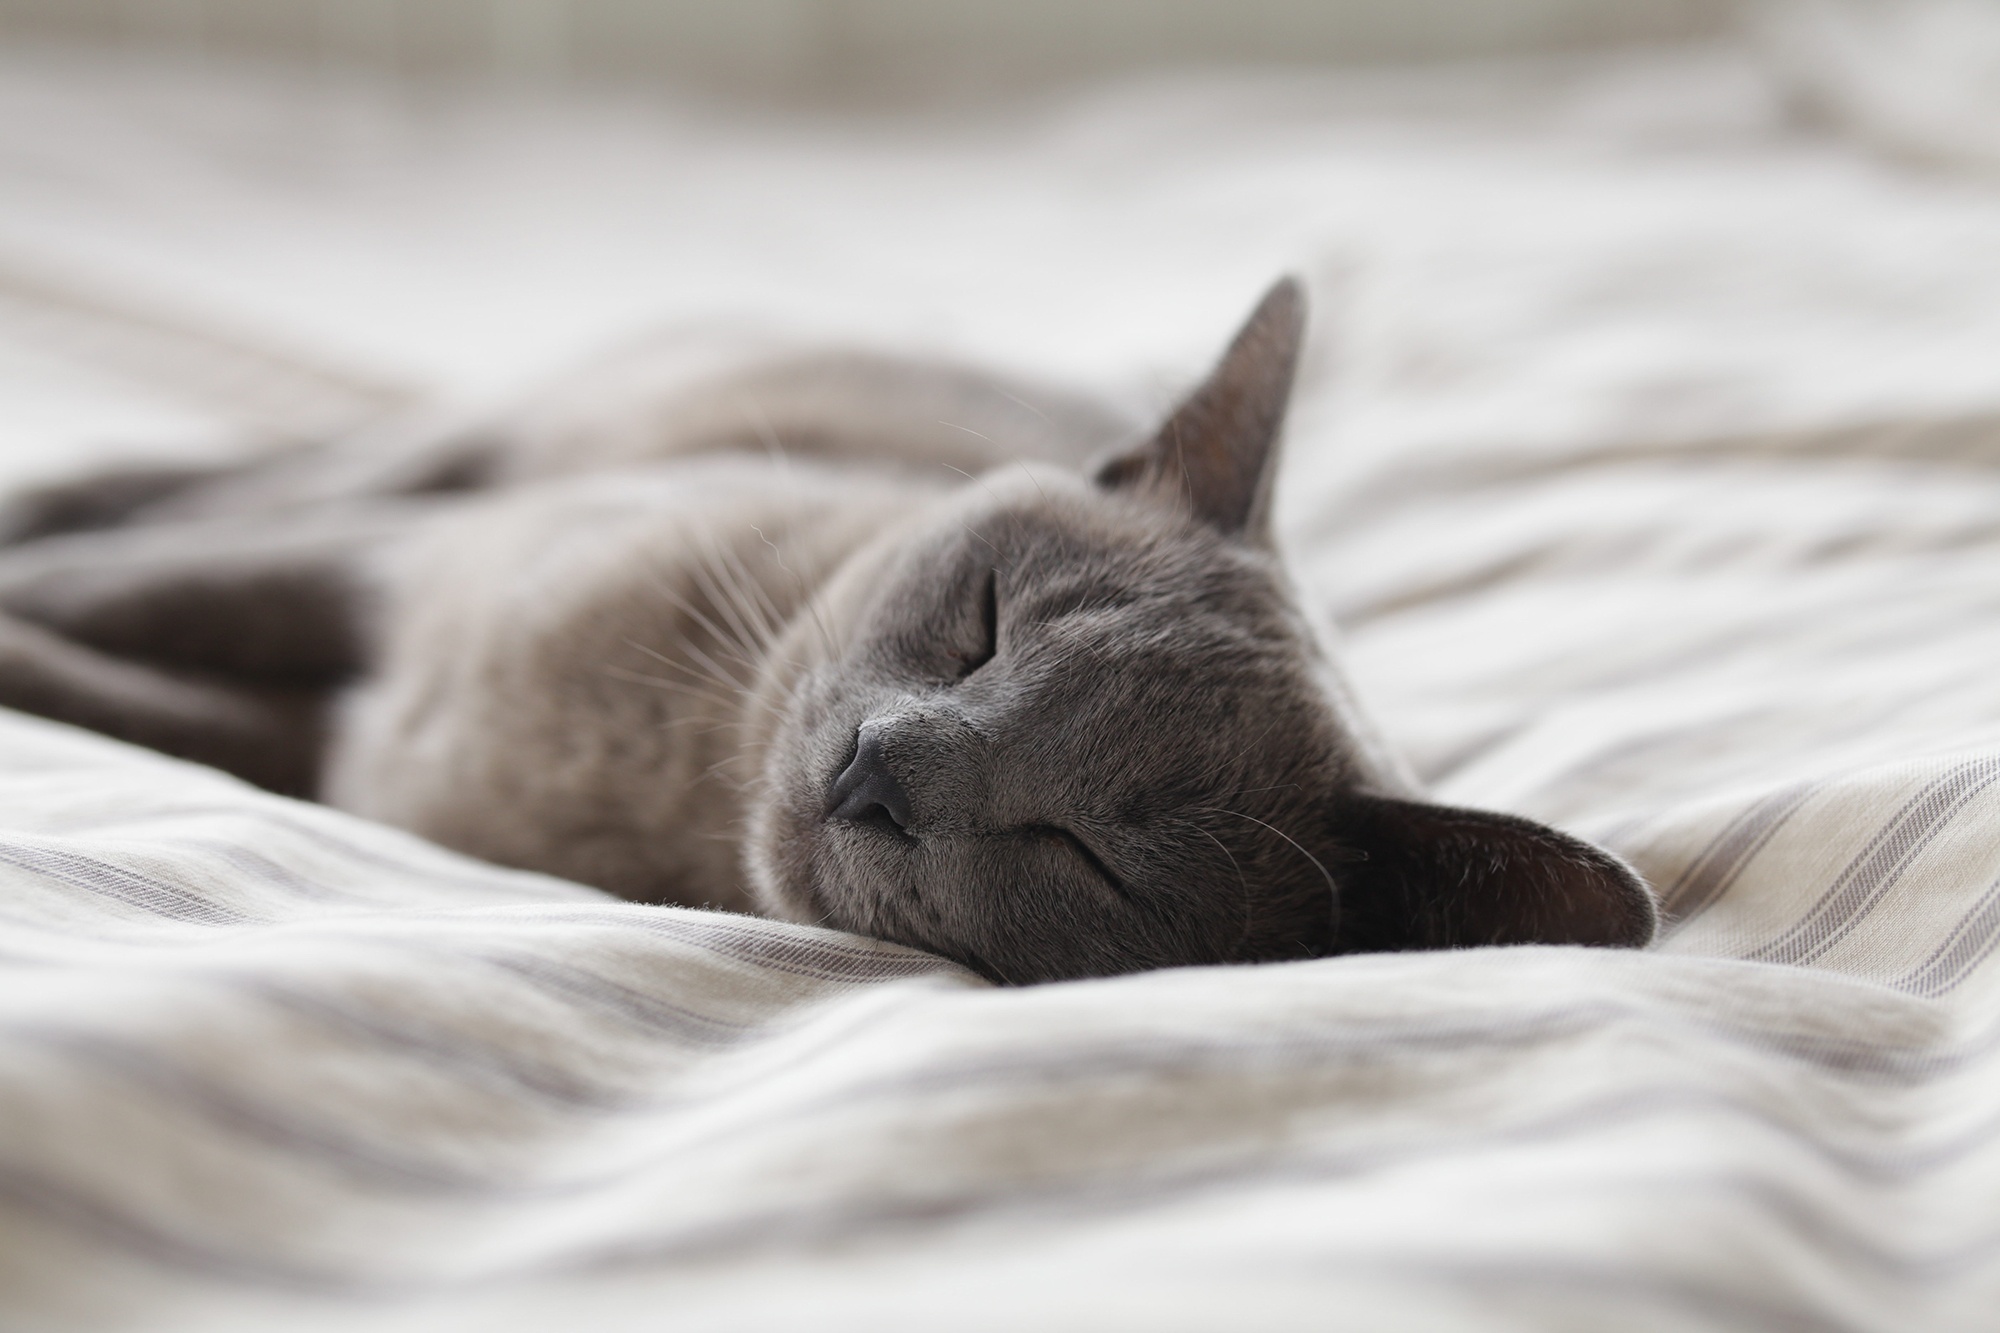 Gray cat sleeping on a bed.